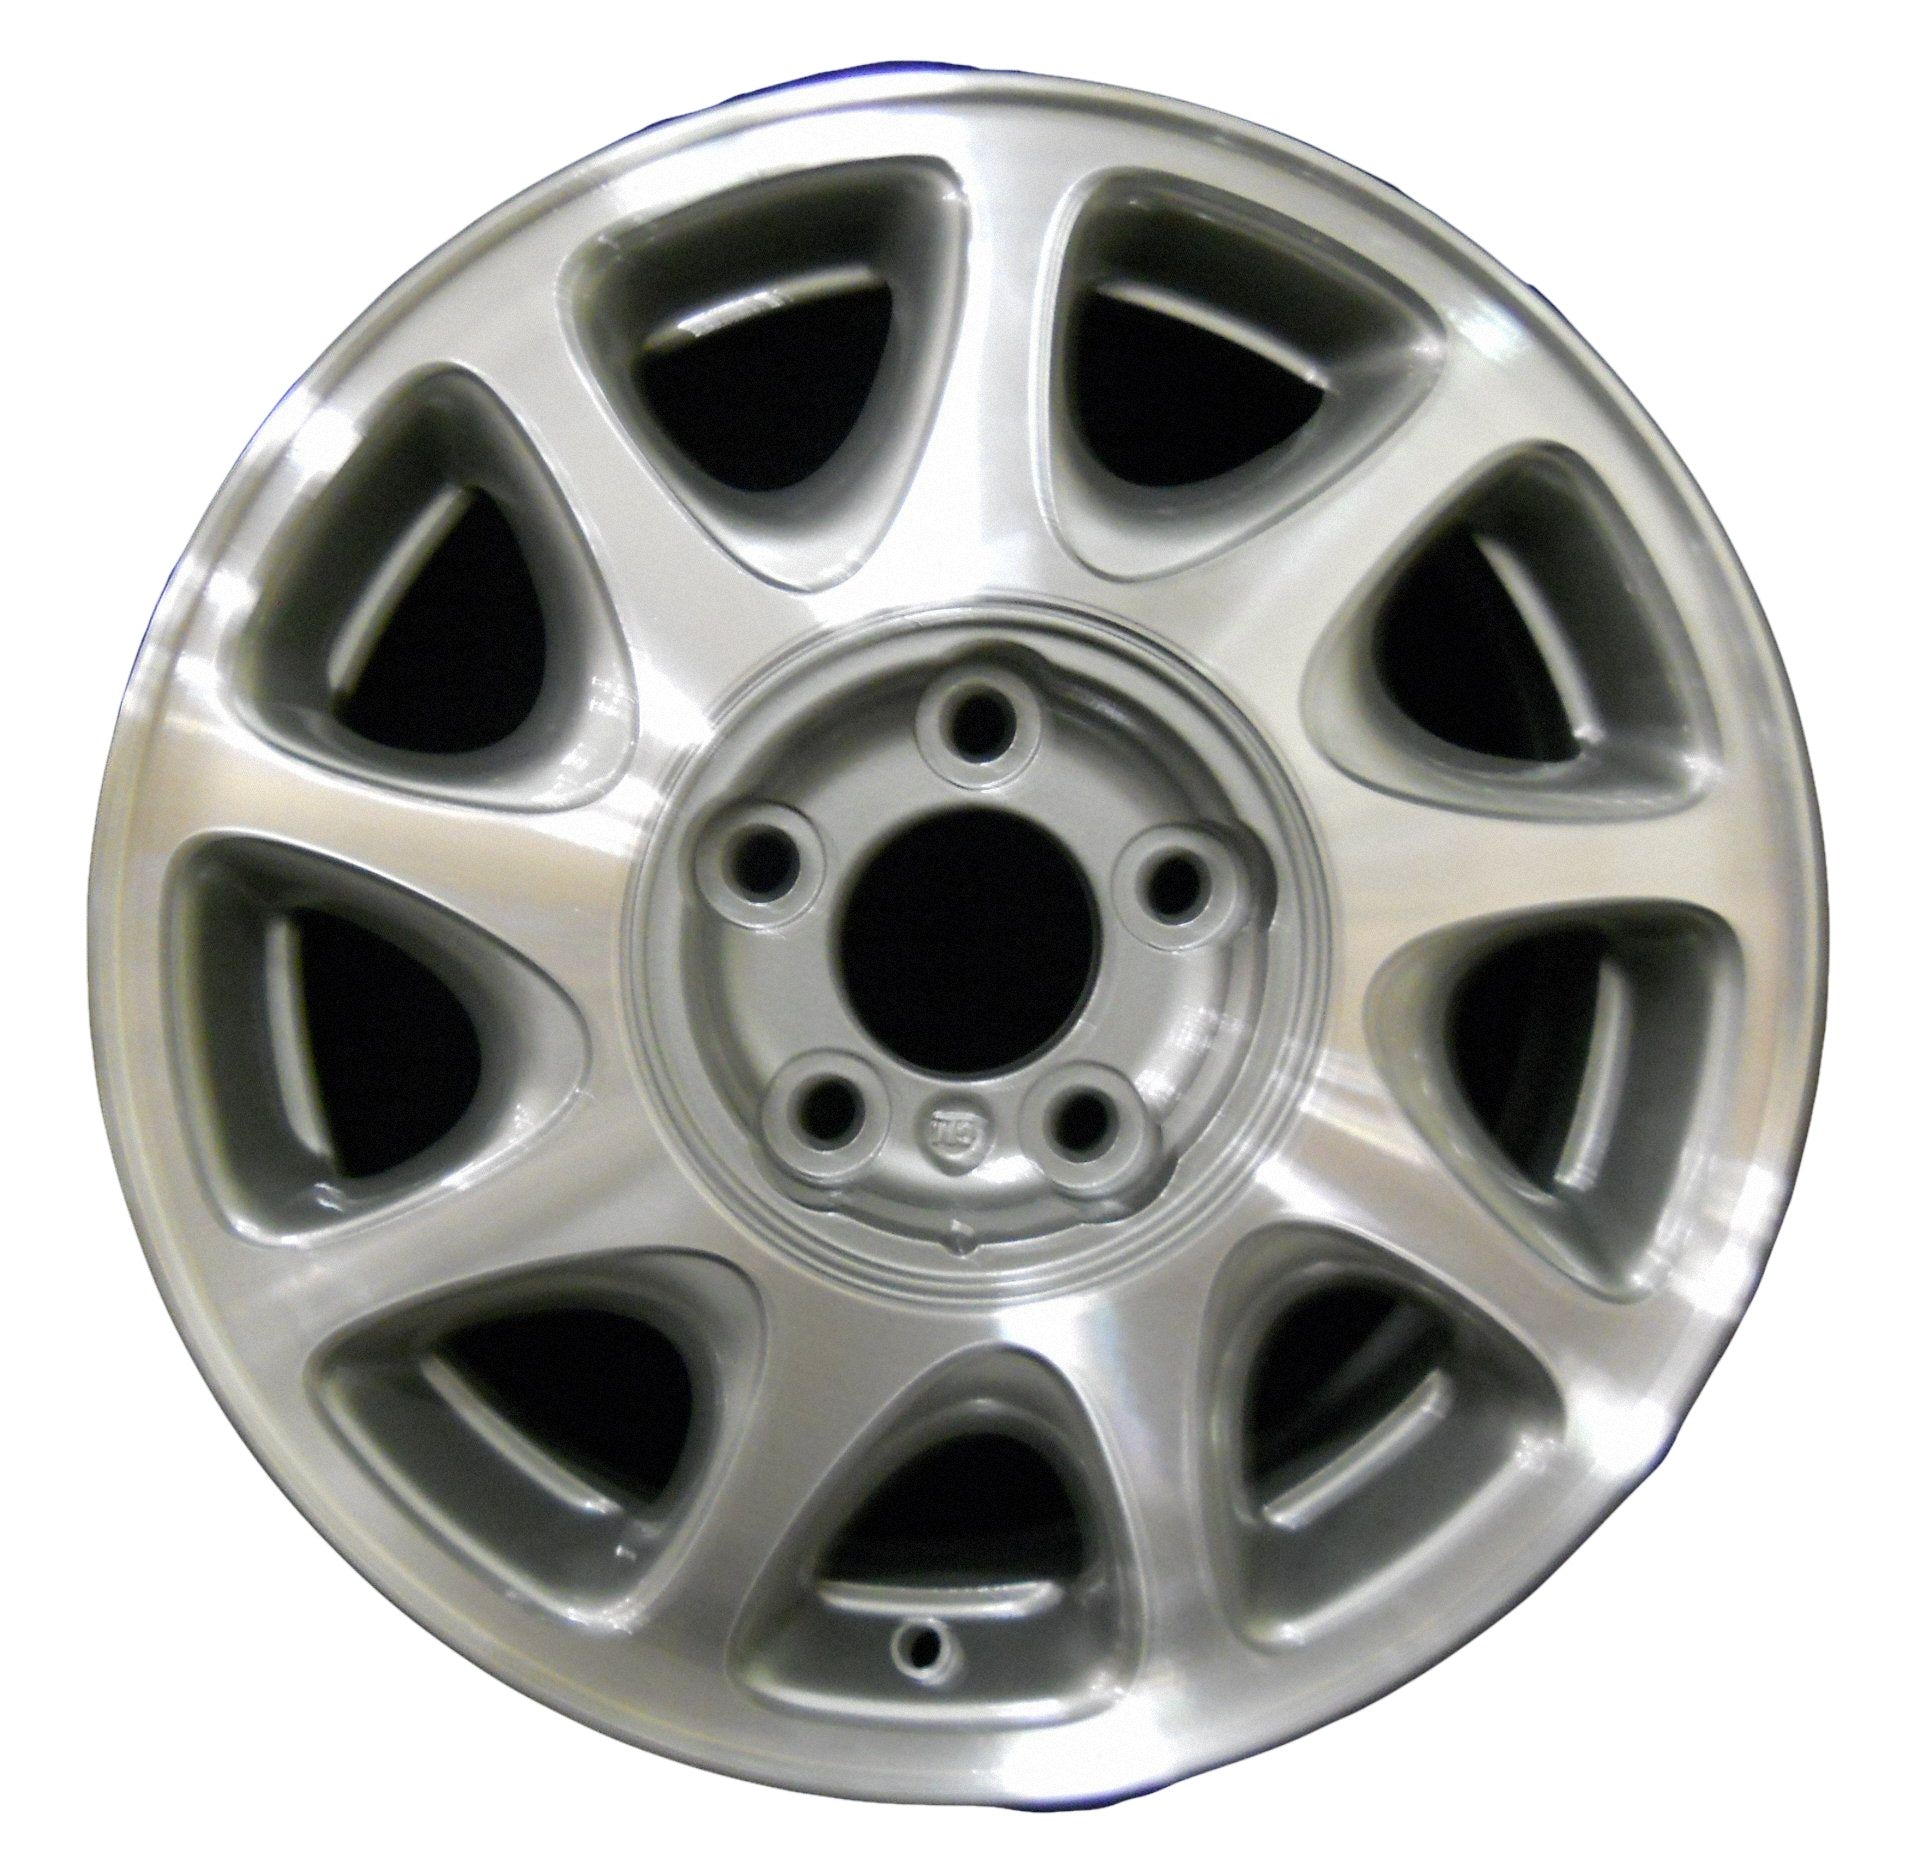 Buick Regal  1997, 1998, 1999, 2000 Factory OEM Car Wheel Size 16x6.5 Alloy WAO.4030.LC18.MA